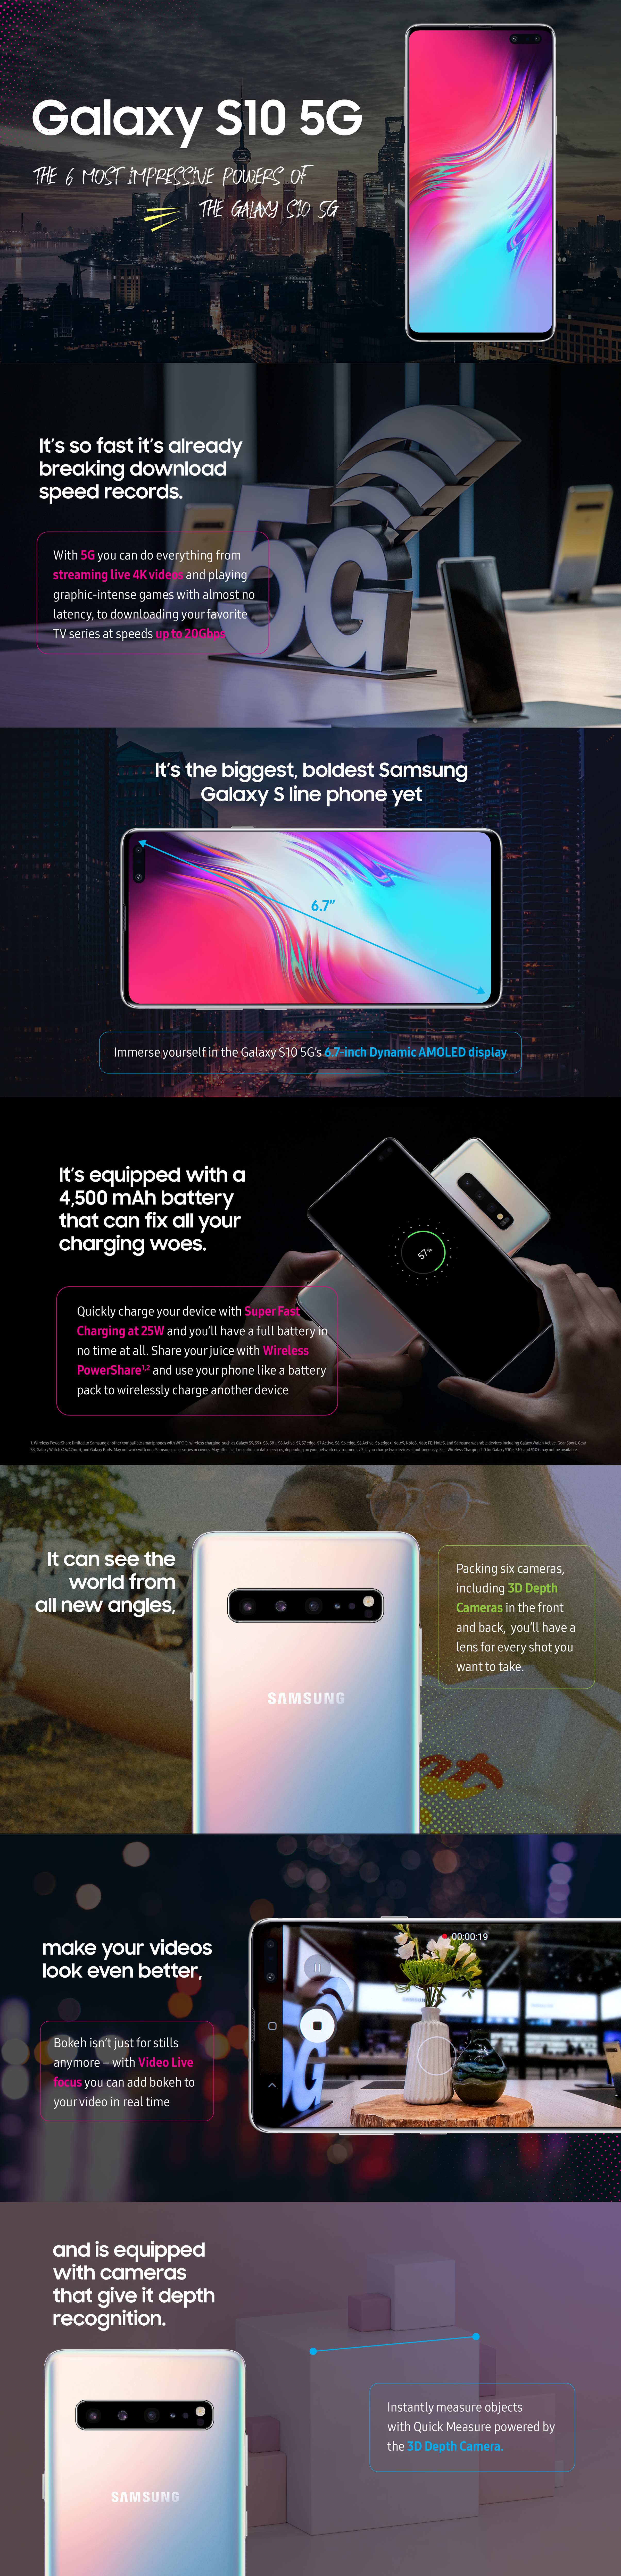 Galaxy S10 5G infographic